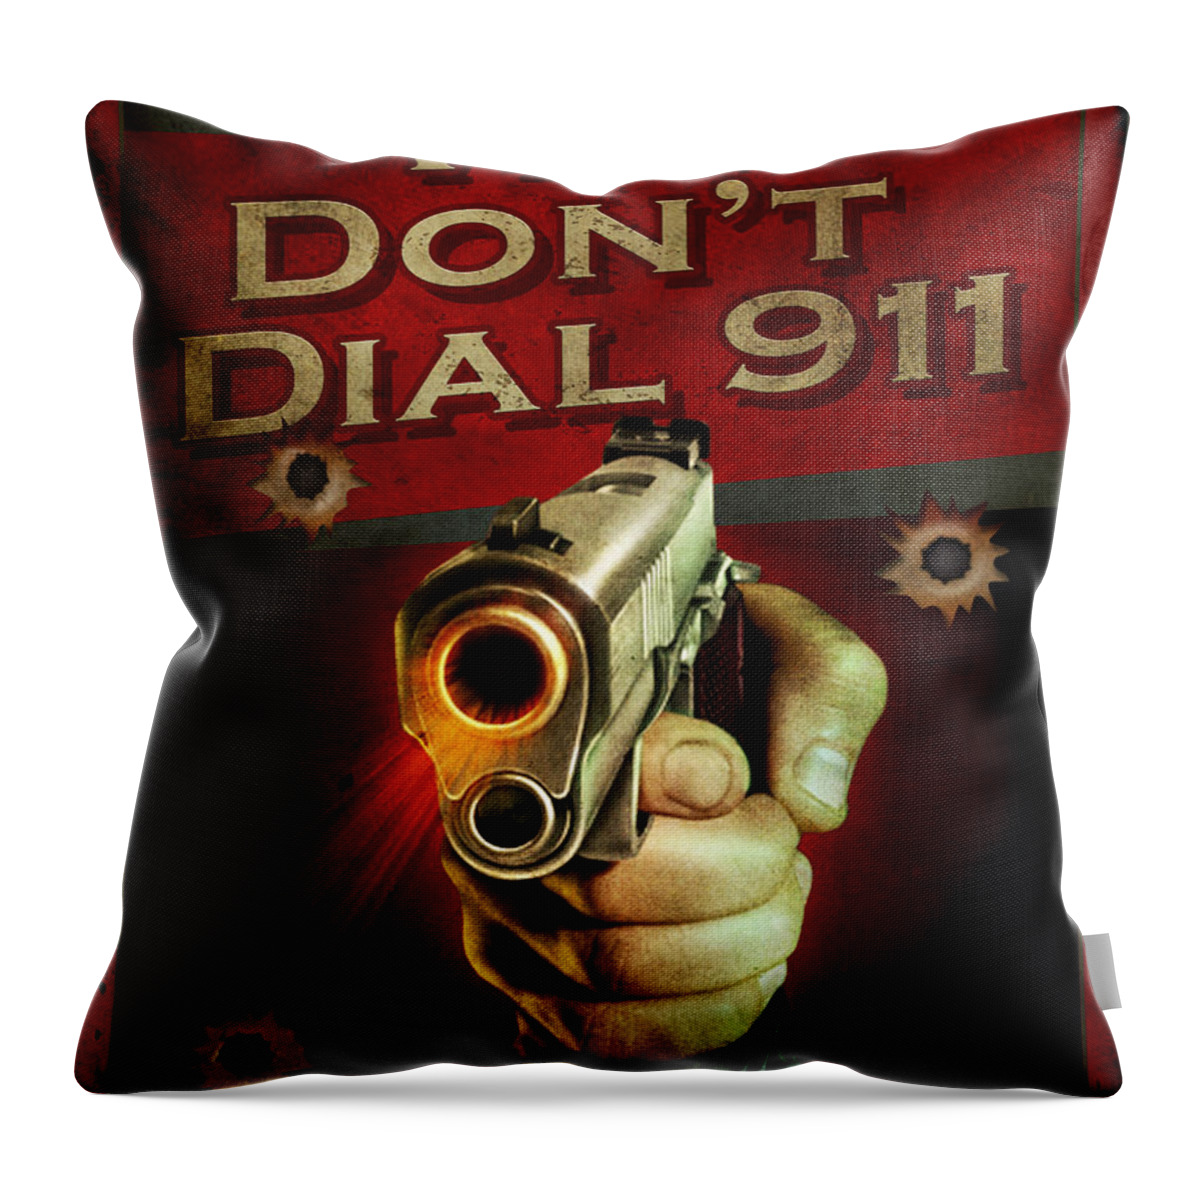 Wildlife 911 Emergency Dial Gun Pistol Hunting Security Armed Shoot Shooting Ammo Shells 45 Forty Five Weapon Hand Throw Pillow featuring the painting Dial 911 by JQ Licensing